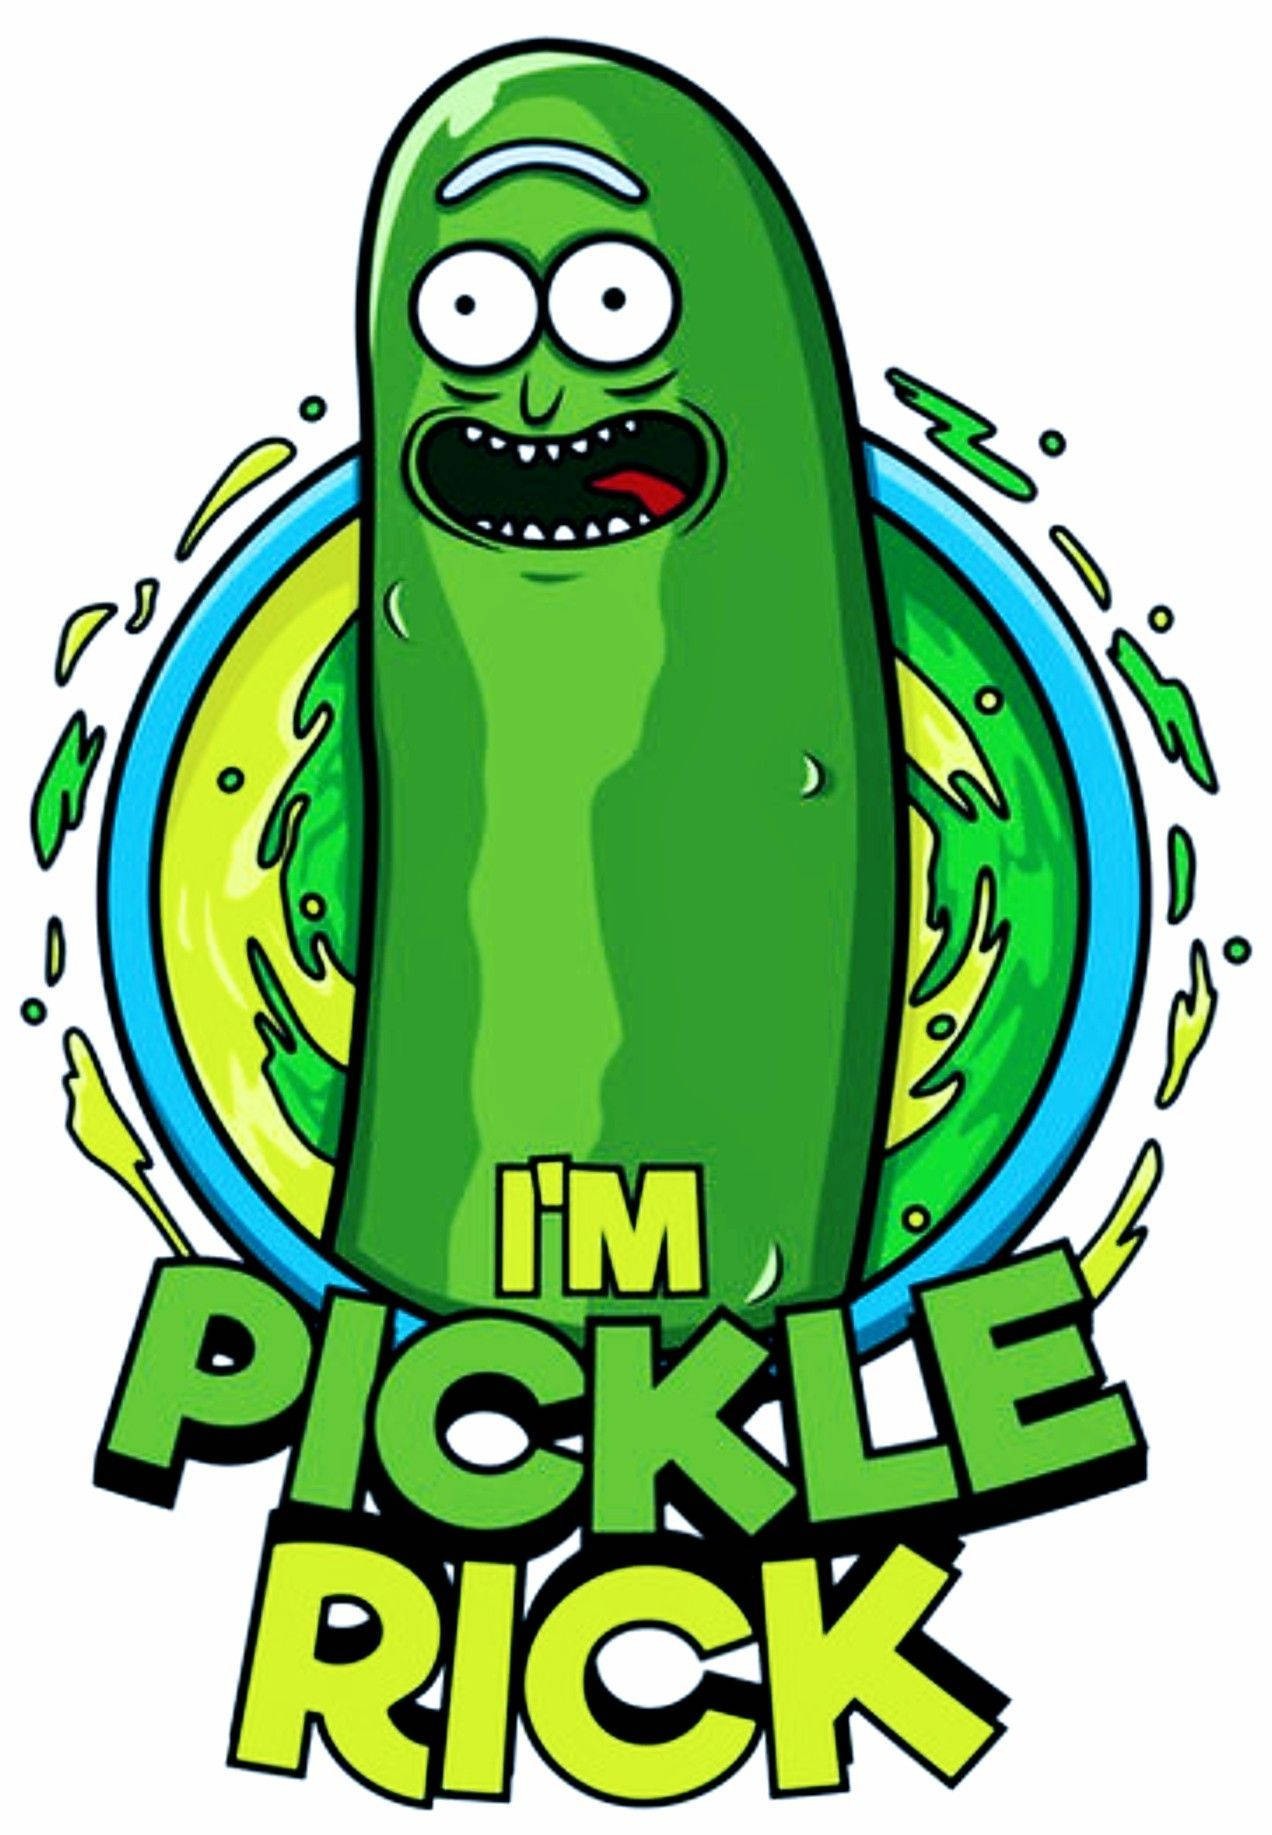 Iconic Pickle Rick From The Animated Series, Rick And Morty, Encased In A Circle. Wallpaper